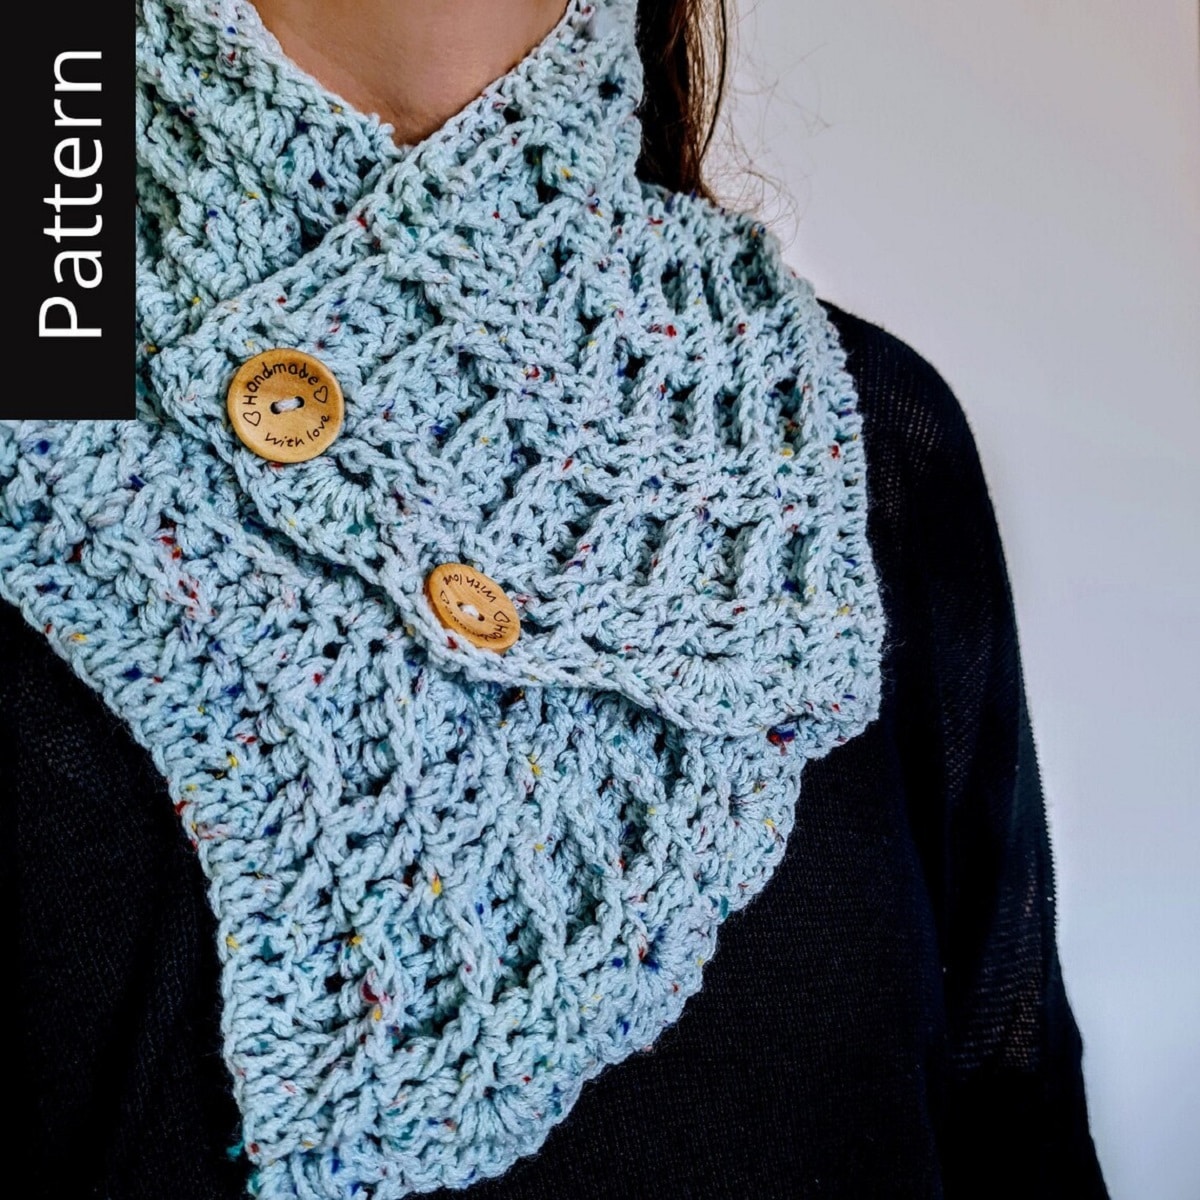 Brunette woman wearing a blue crochet cowl with a loose waffle stitch and brown buttons on the side to secure it.